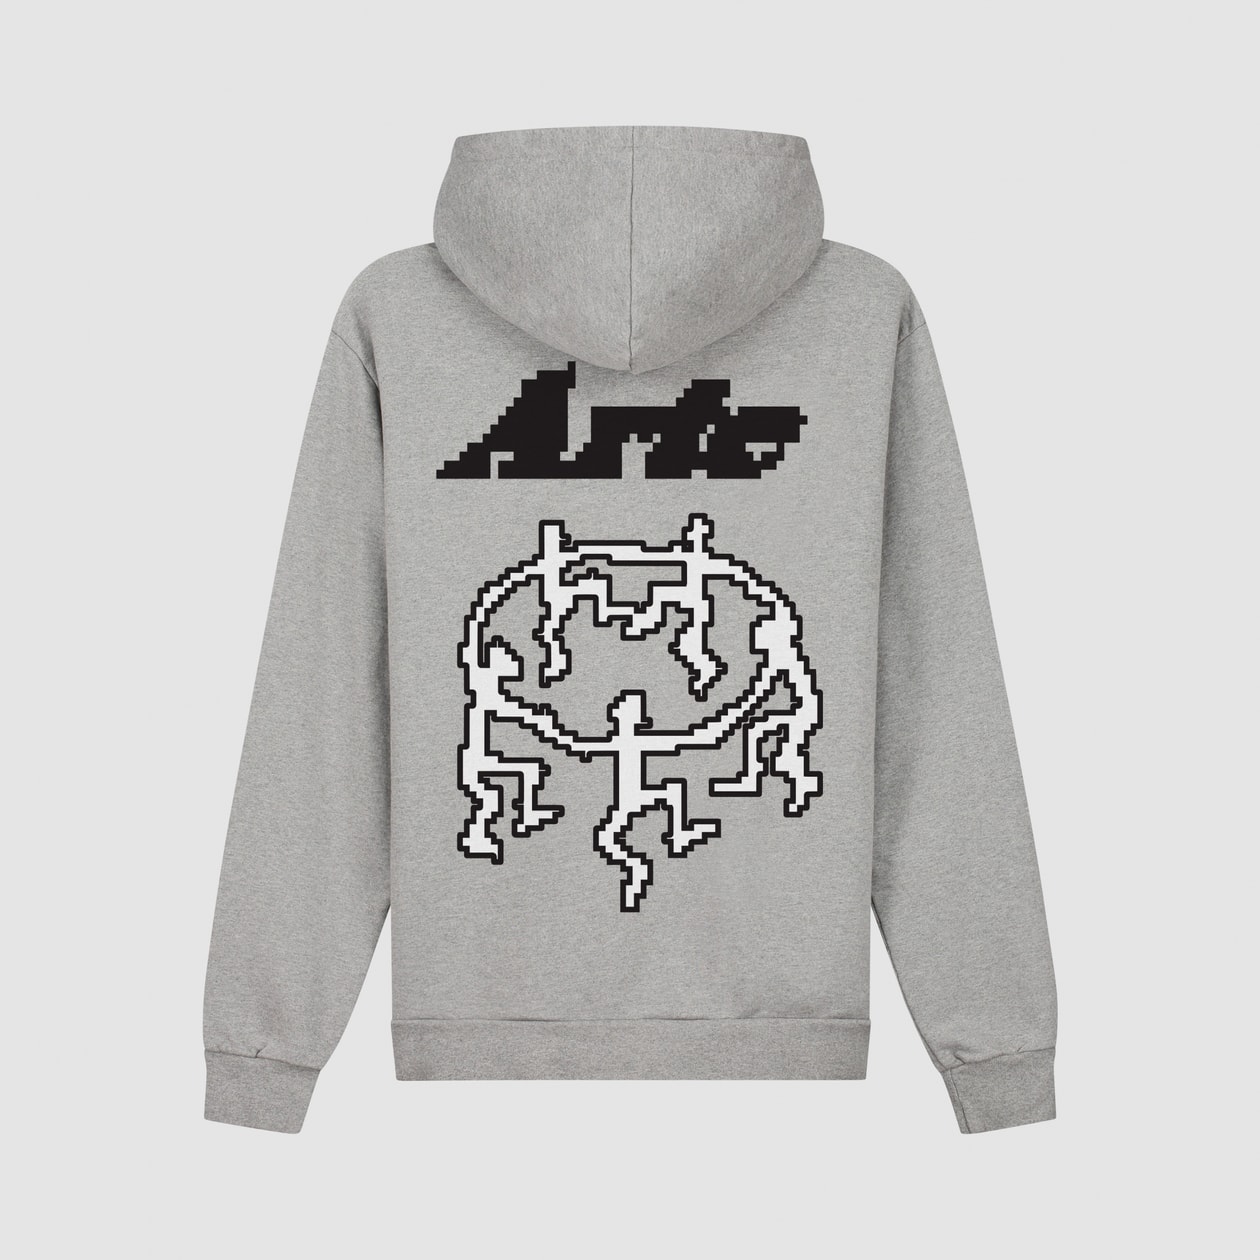 Arte Antwerp Releases Autumn/Winter ‘23 Collection drop one technology early digital age pixelated graphic design modern art 